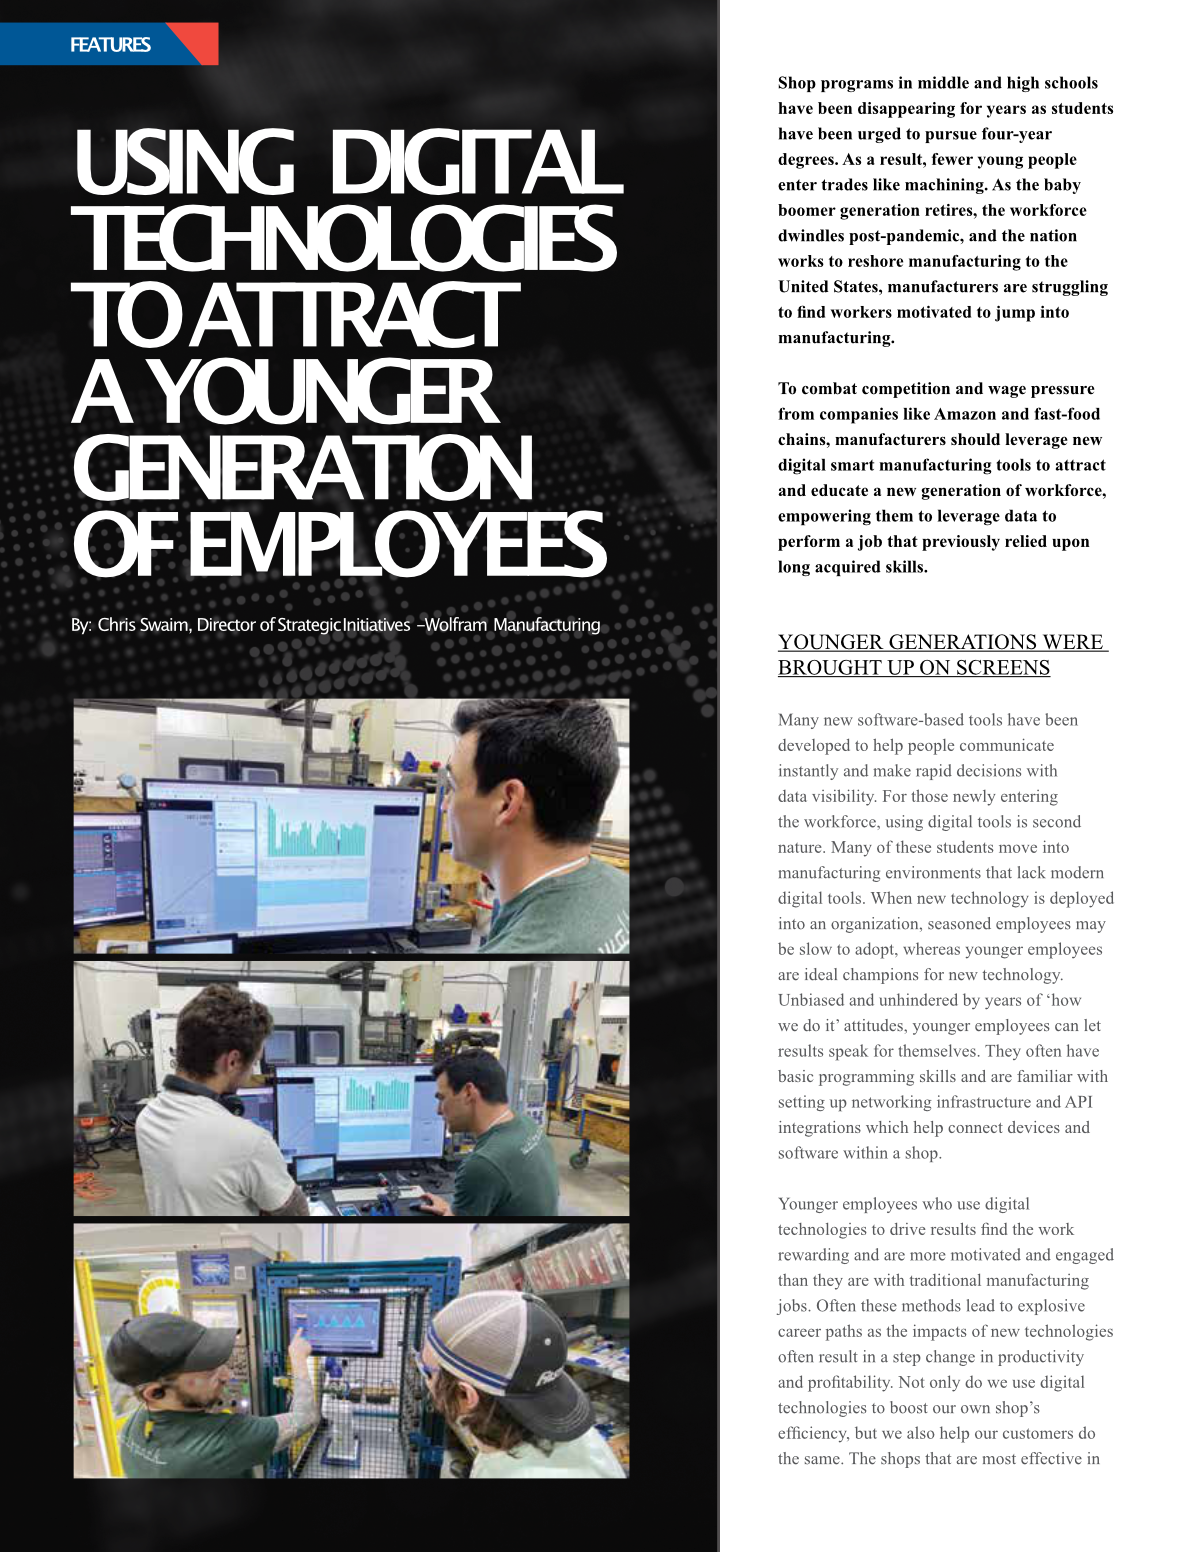 NTMA The Record, Dec. 2022, CNC Machine Monitoring Attracting Younger Employees